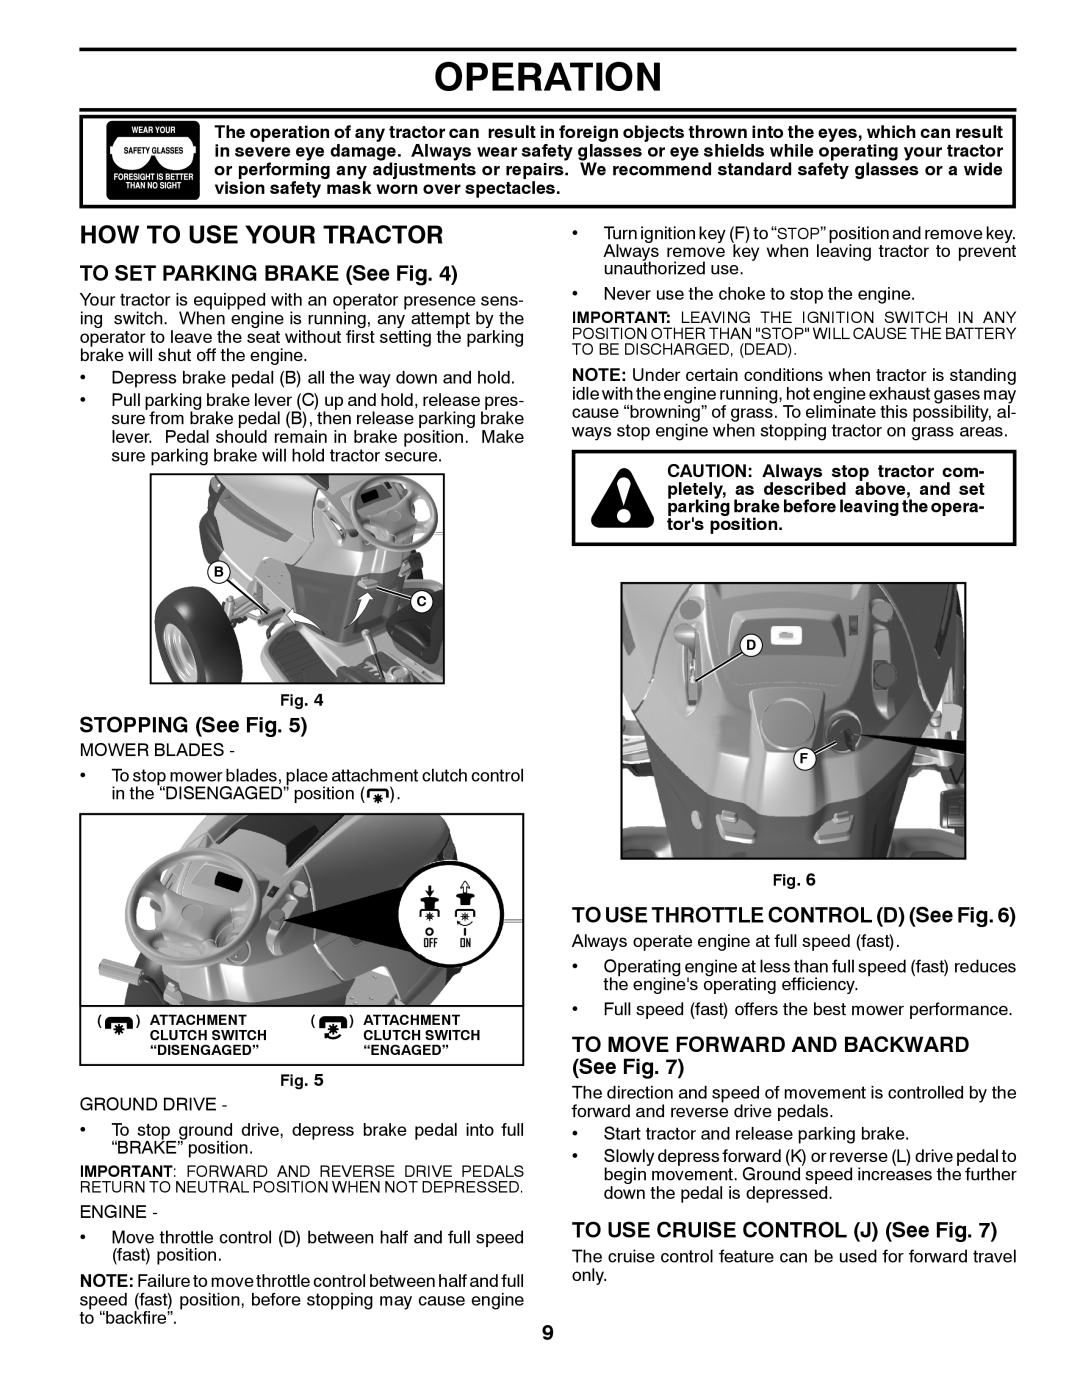 Husqvarna 532 43 86-44, 96045002700 How To Use Your Tractor, TO SET PARKING BRAKE See Fig, STOPPING See Fig, Operation 